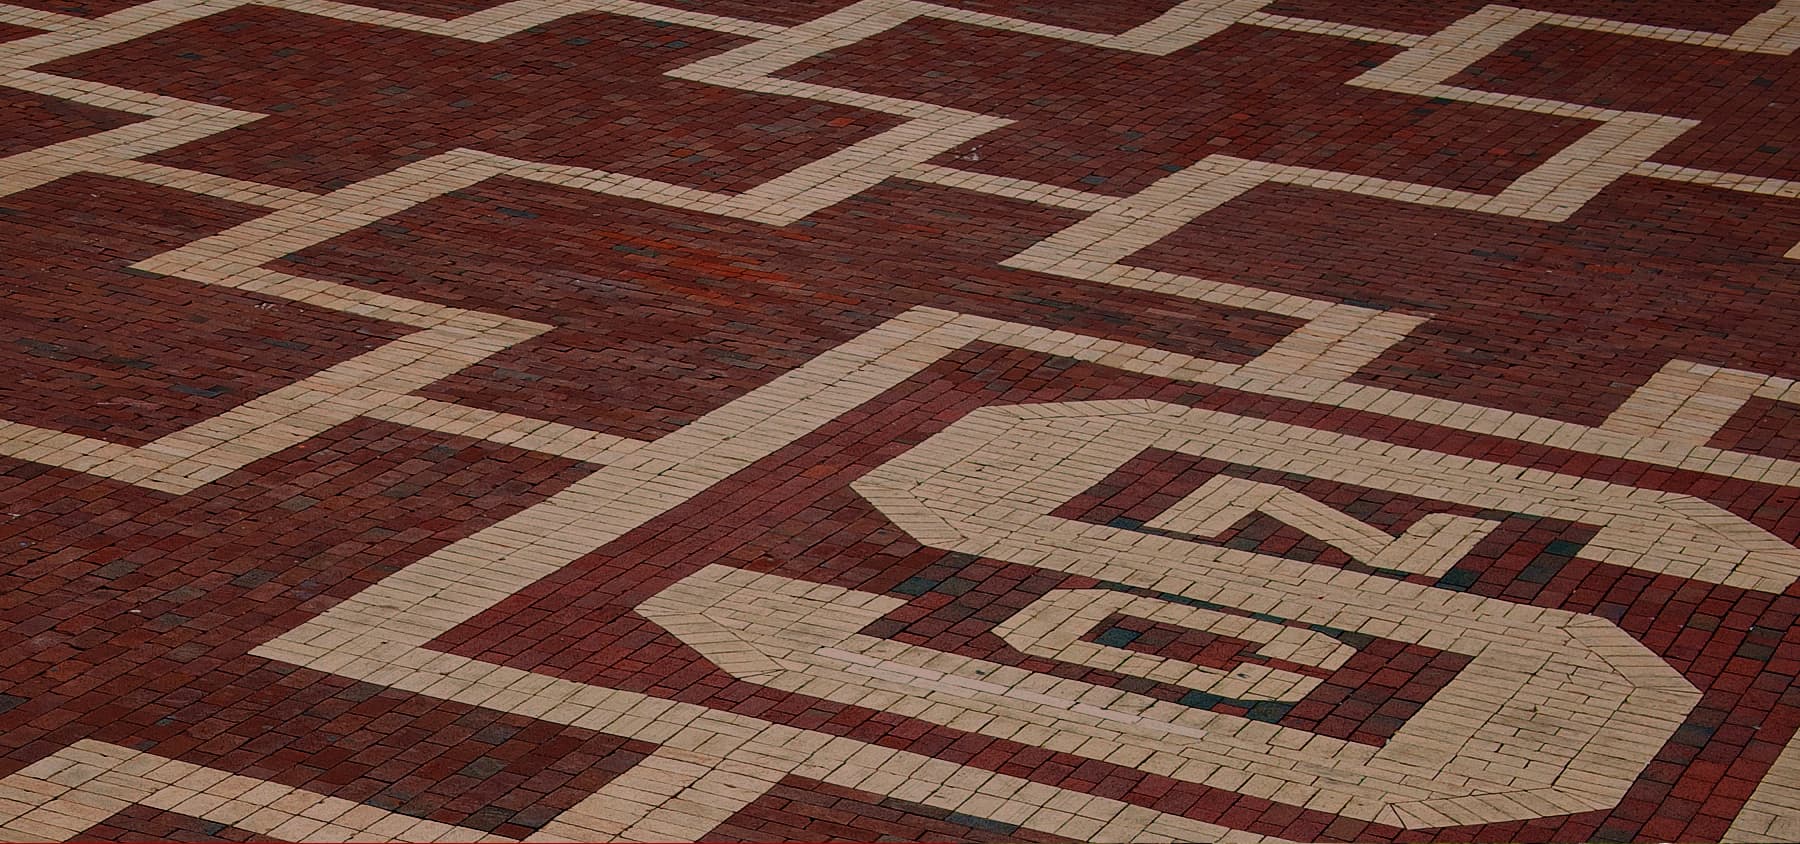 Patterned area of bricks with the NC State block S logo